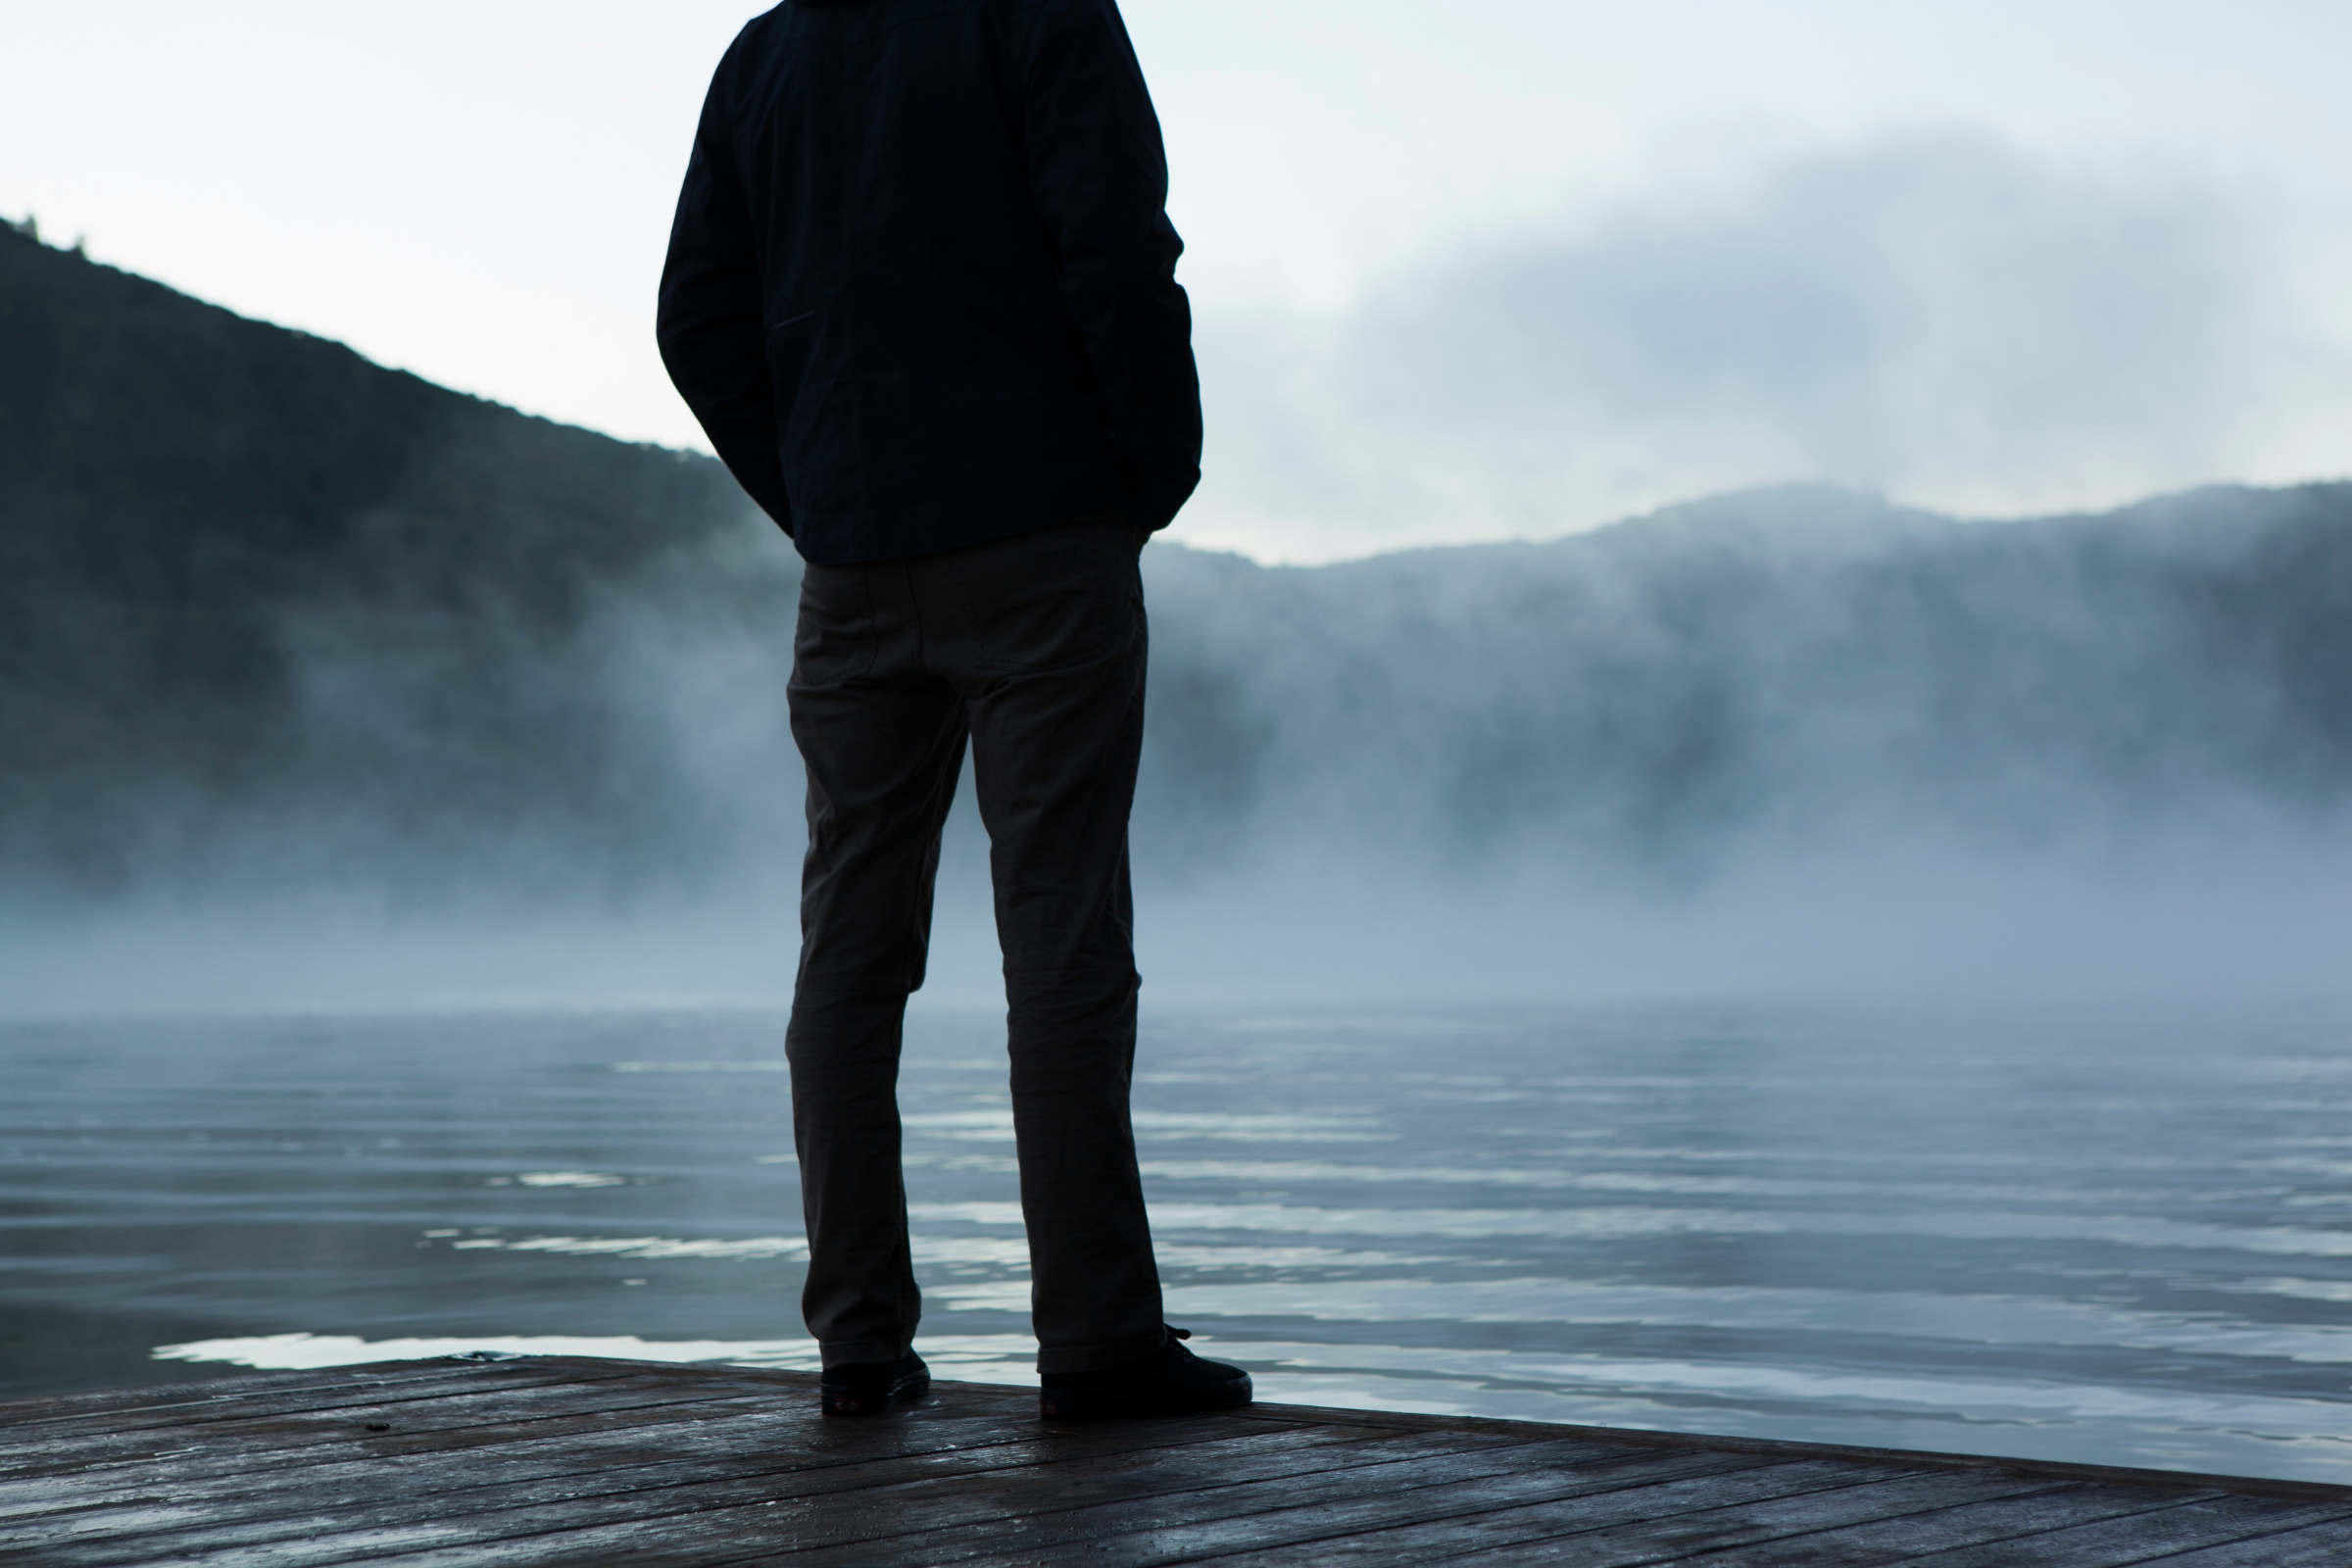 a person in shadow stands in front of a misty body of water surrounded by mountains